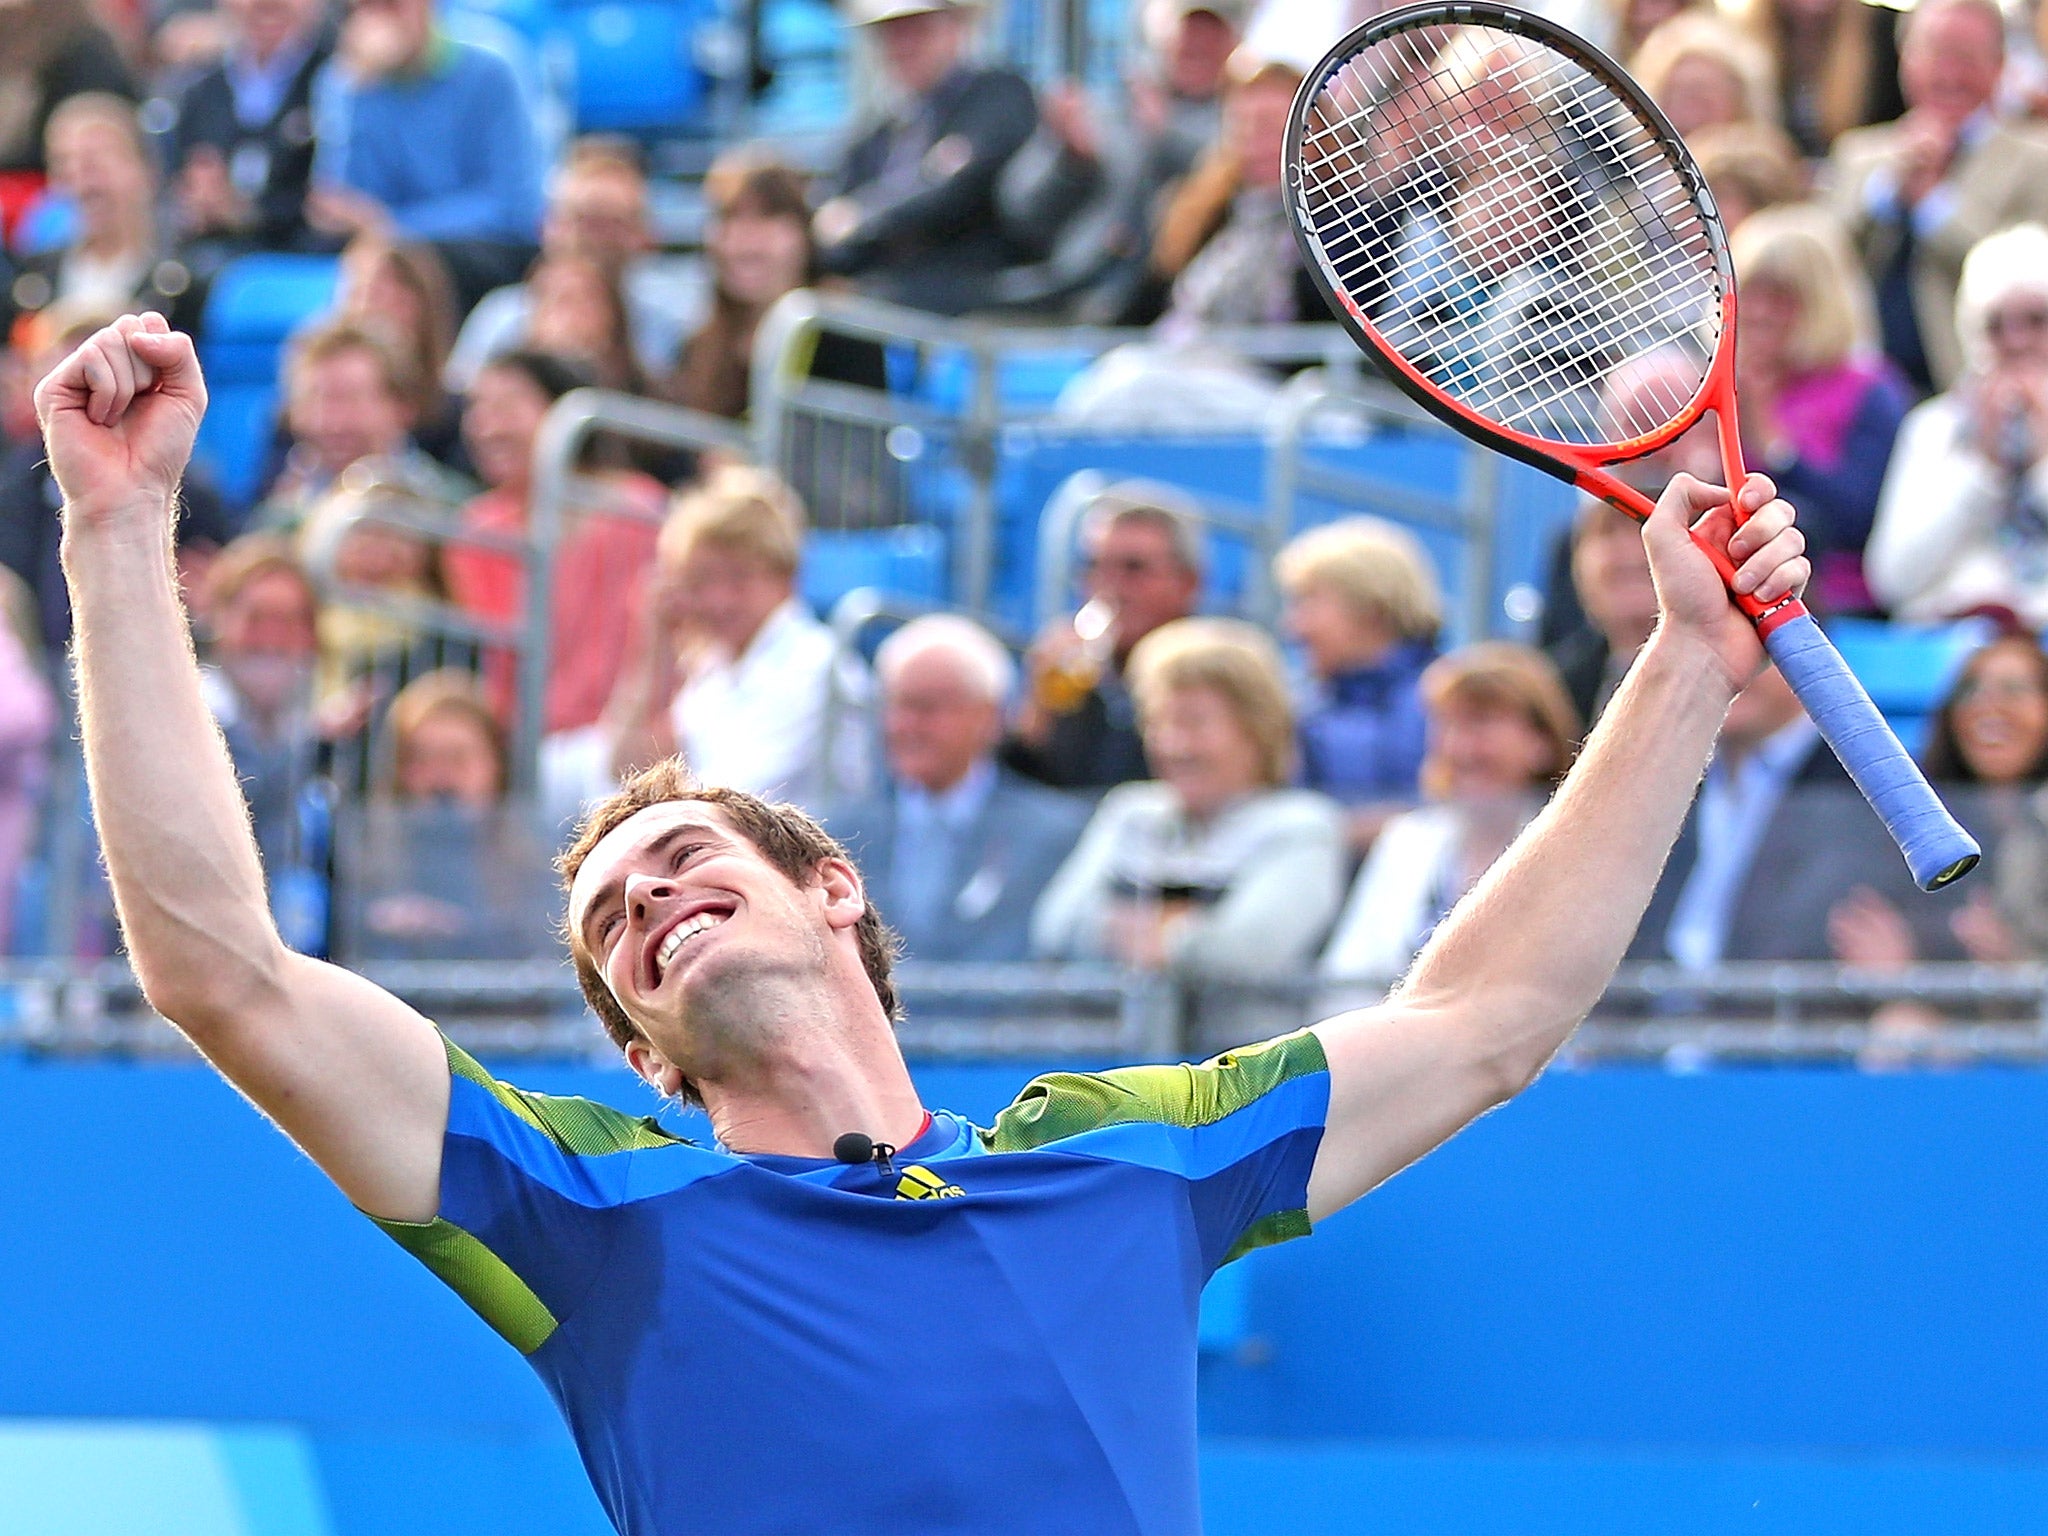 Murray is hoping to avenge his defeat in last year’s final